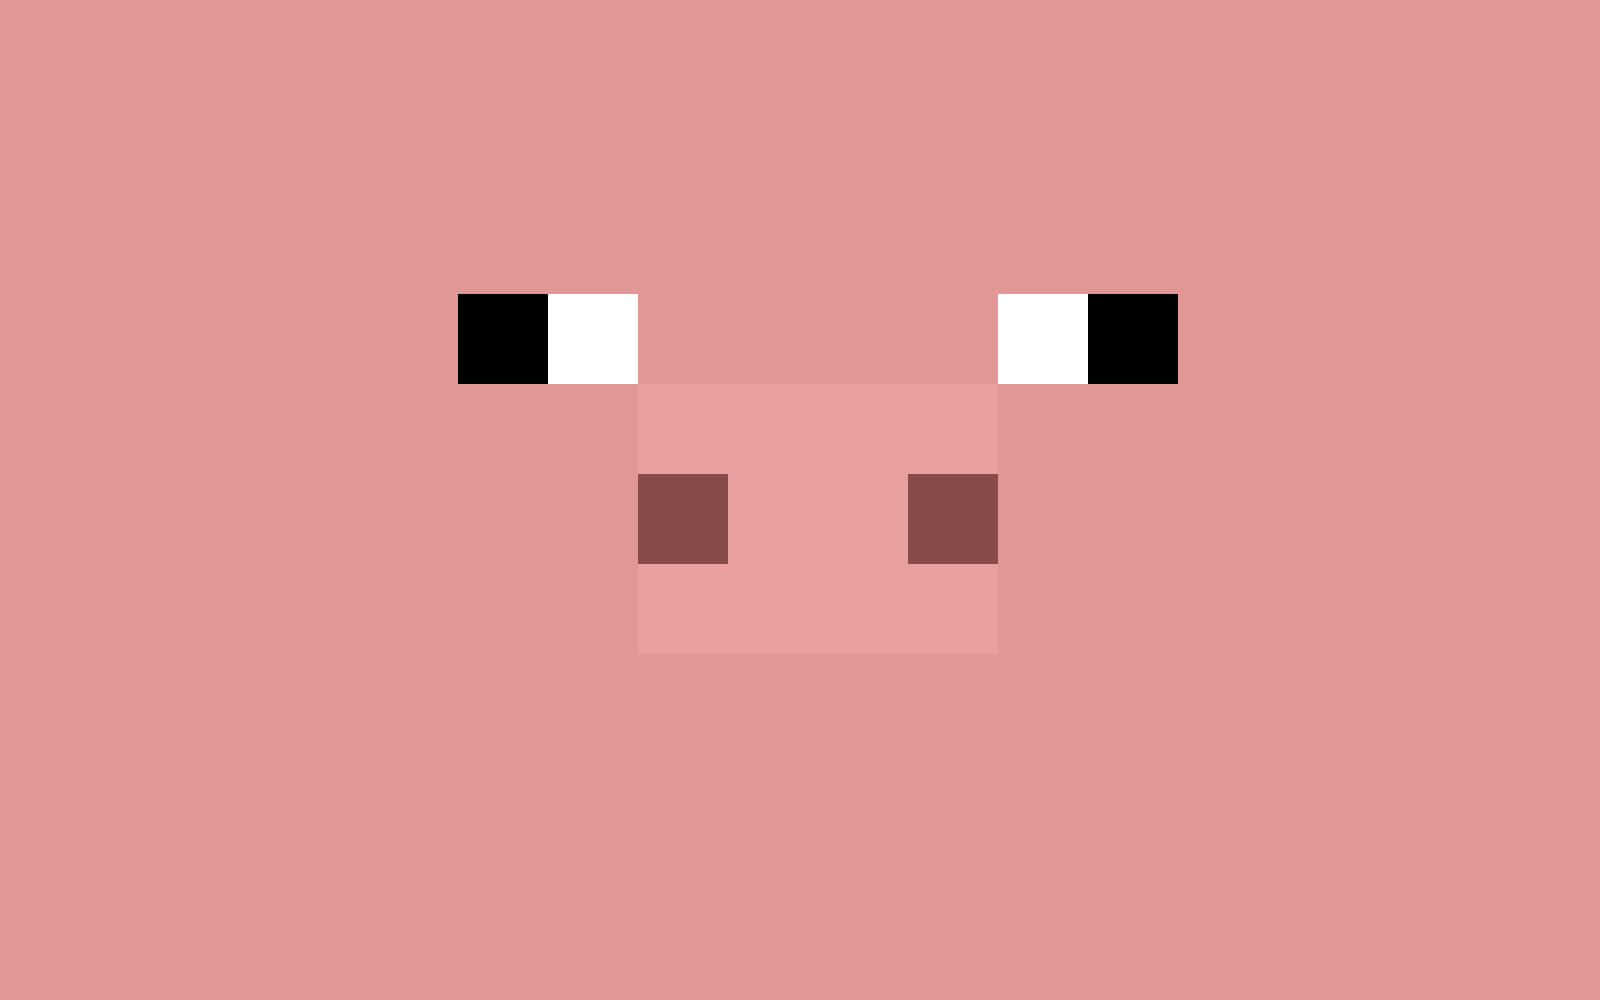 An adorable Minecraft Pig, ready to explore your world! Wallpaper